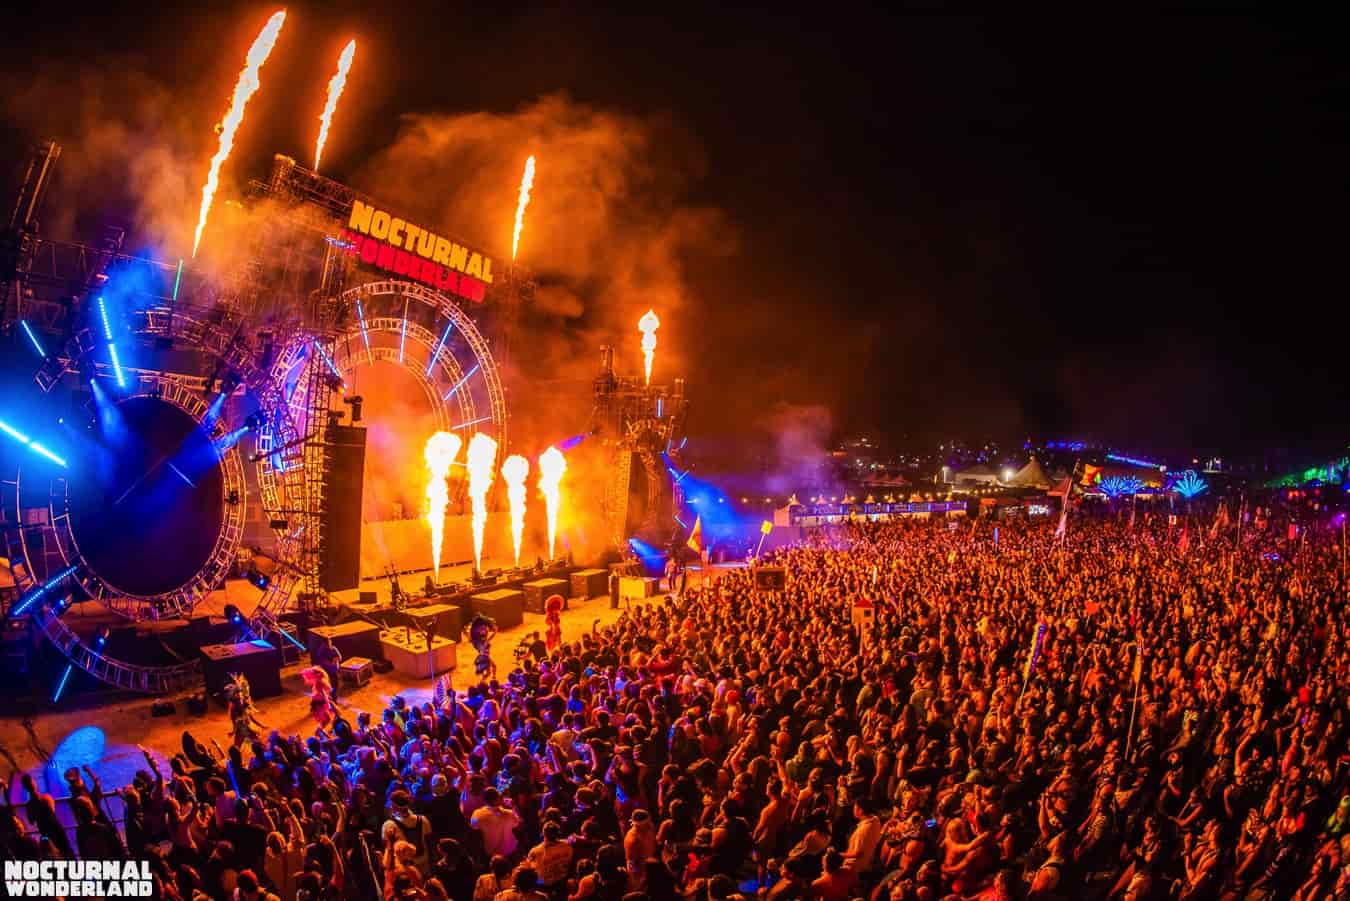 Pasquale Rotella Announces Dates For Nocturnal Wonderland's 25th